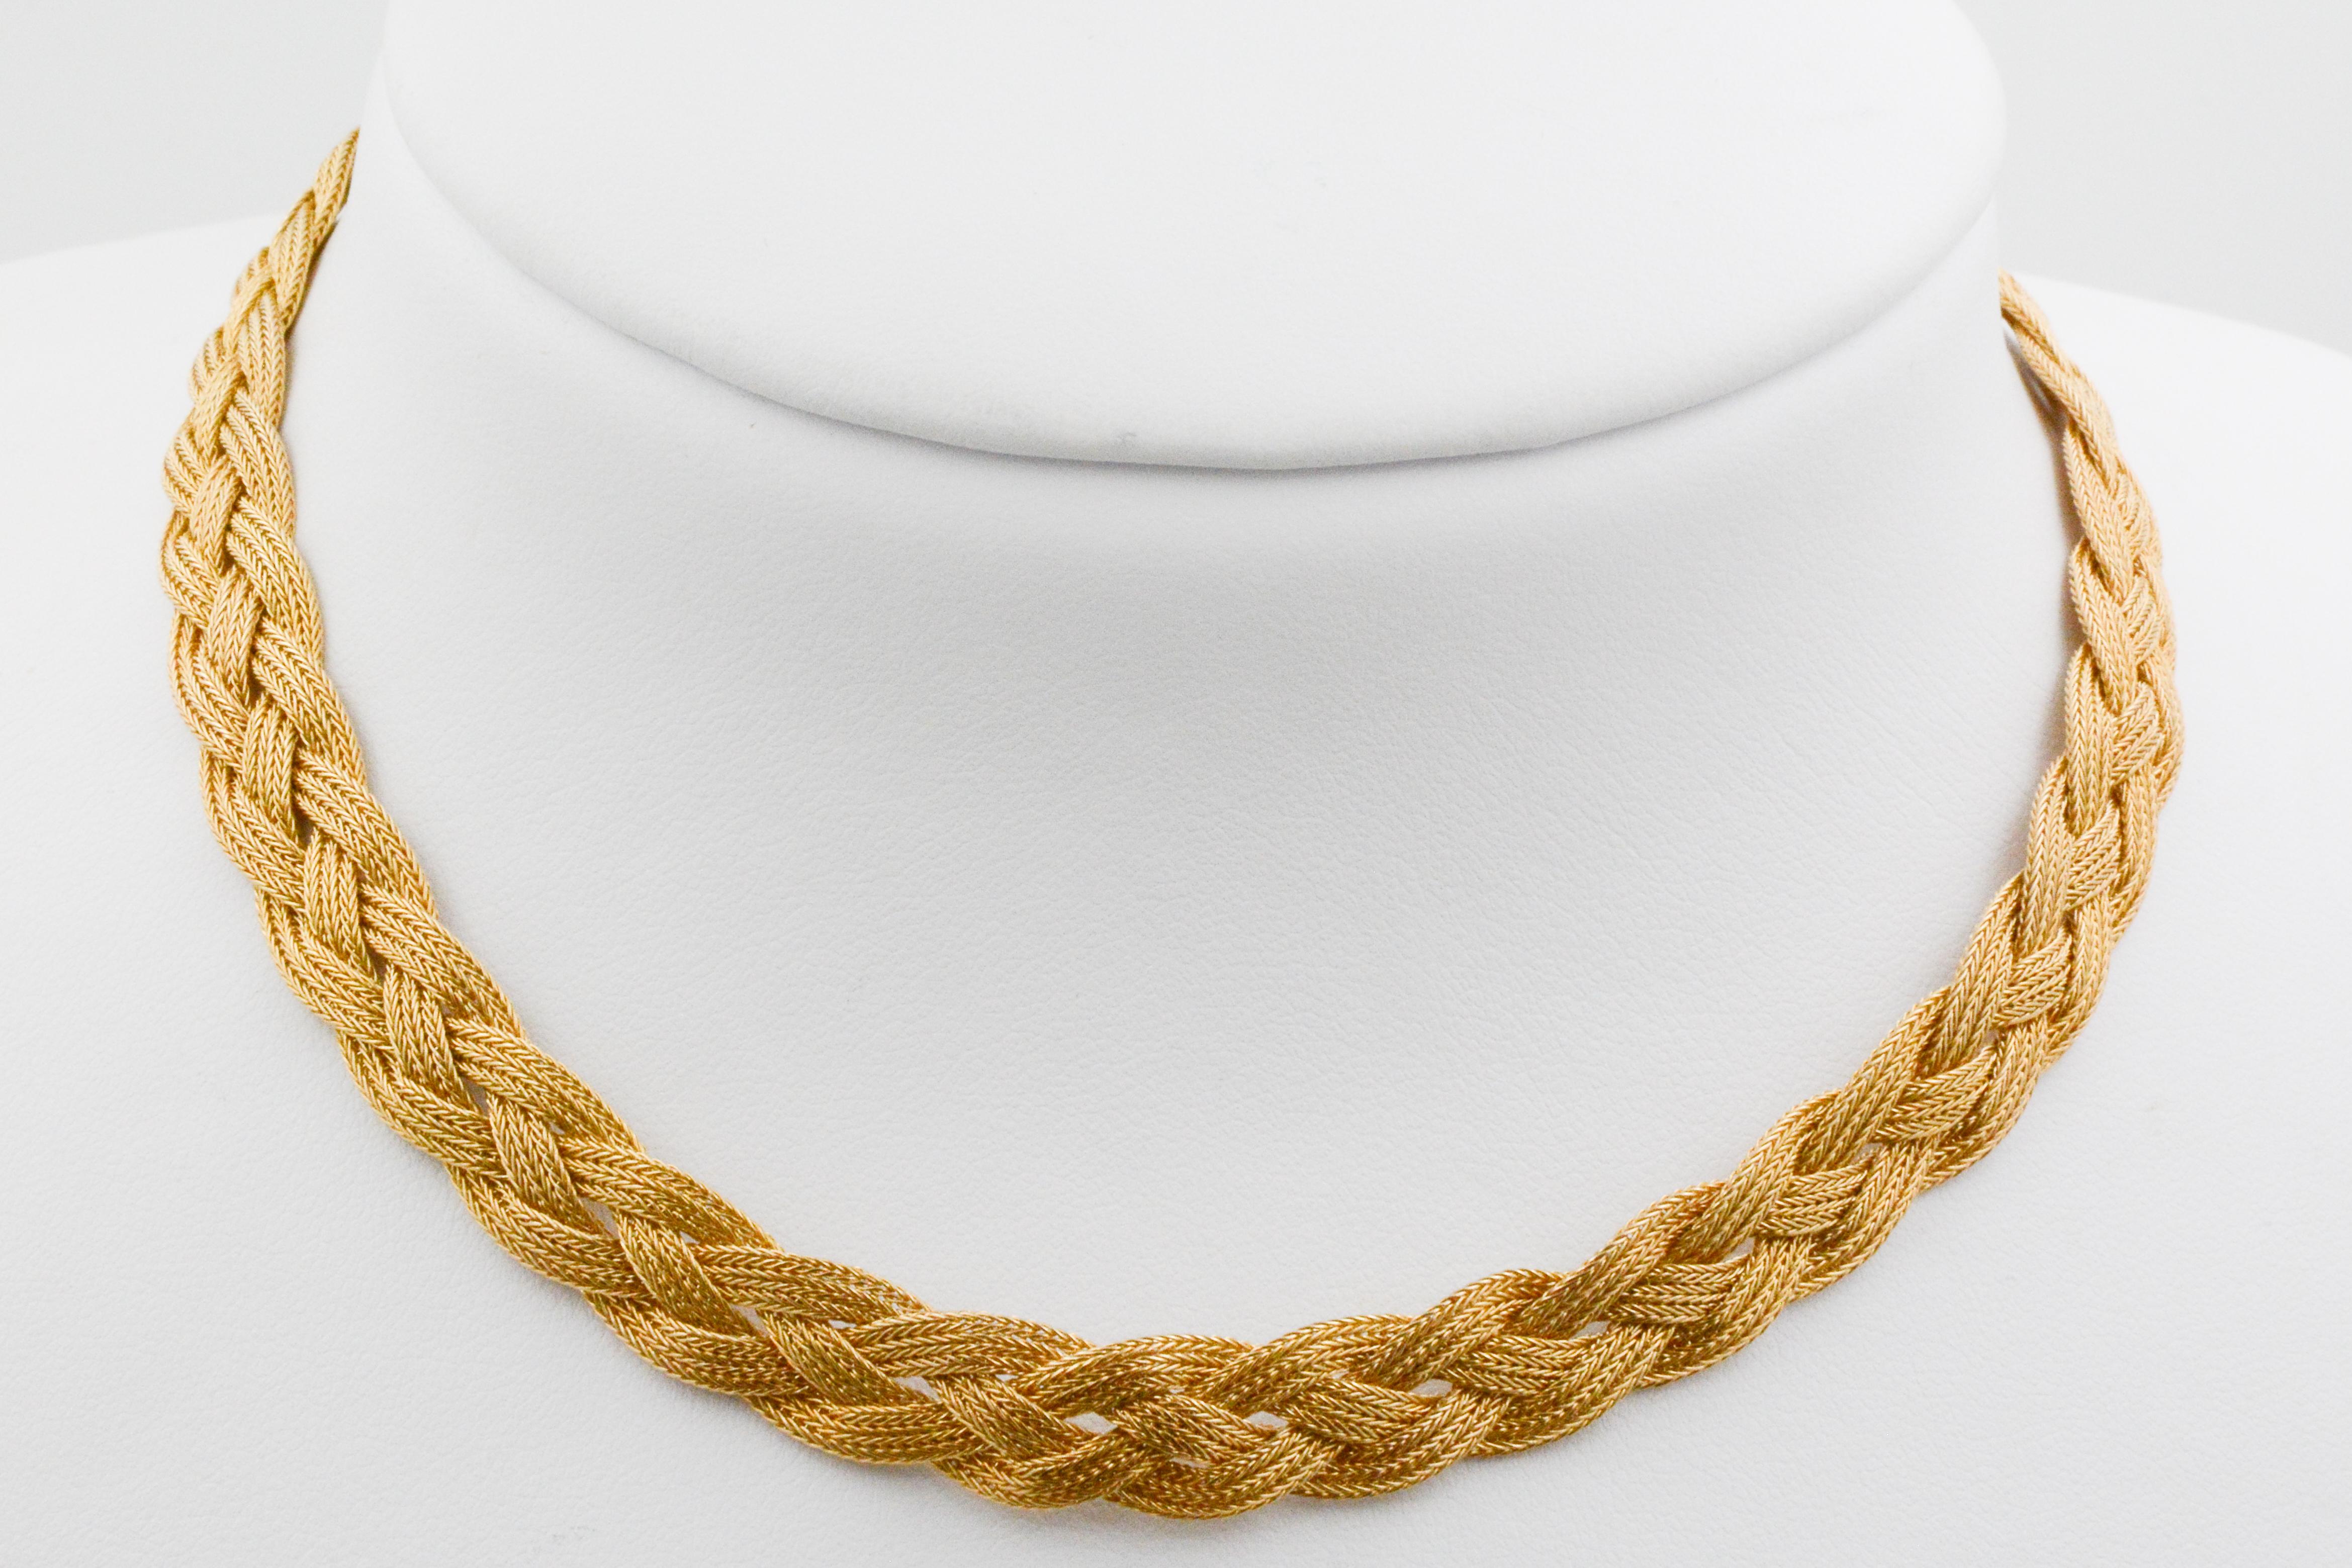 This 14K yellow gold choker necklace is classic and elegant with a beautiful woven braided mesh texture. This simple style encompasses the true meaning of Italy's craftsmanship.  

